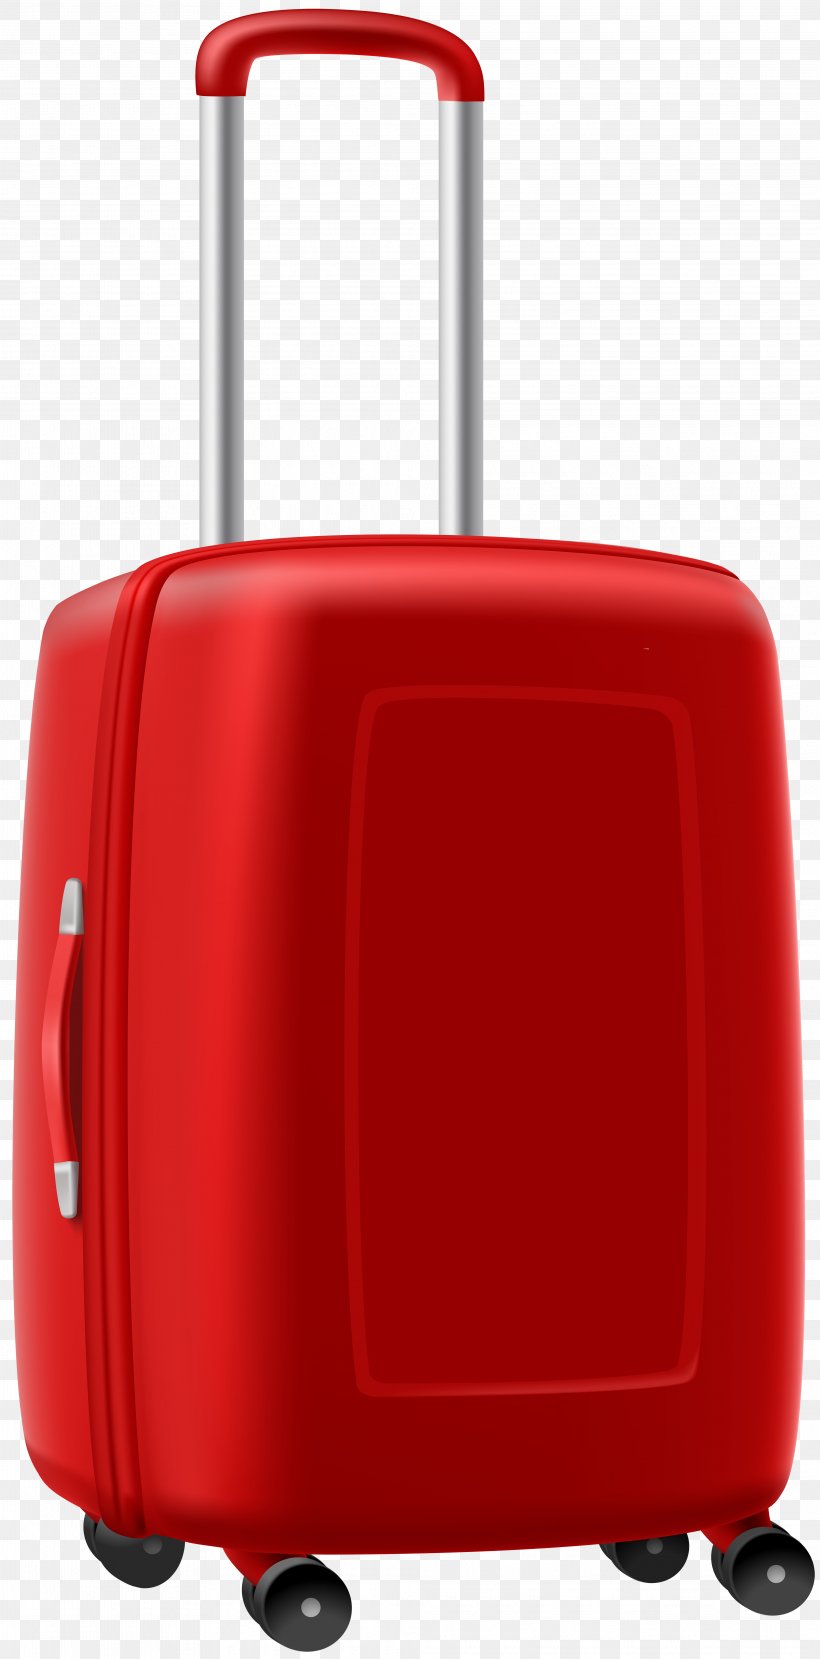 Suitcase Baggage Trolley Clip Art, PNG, 3952x8000px, Suitcase, Bag, Baggage, Hand Luggage, Luggage Bags Download Free